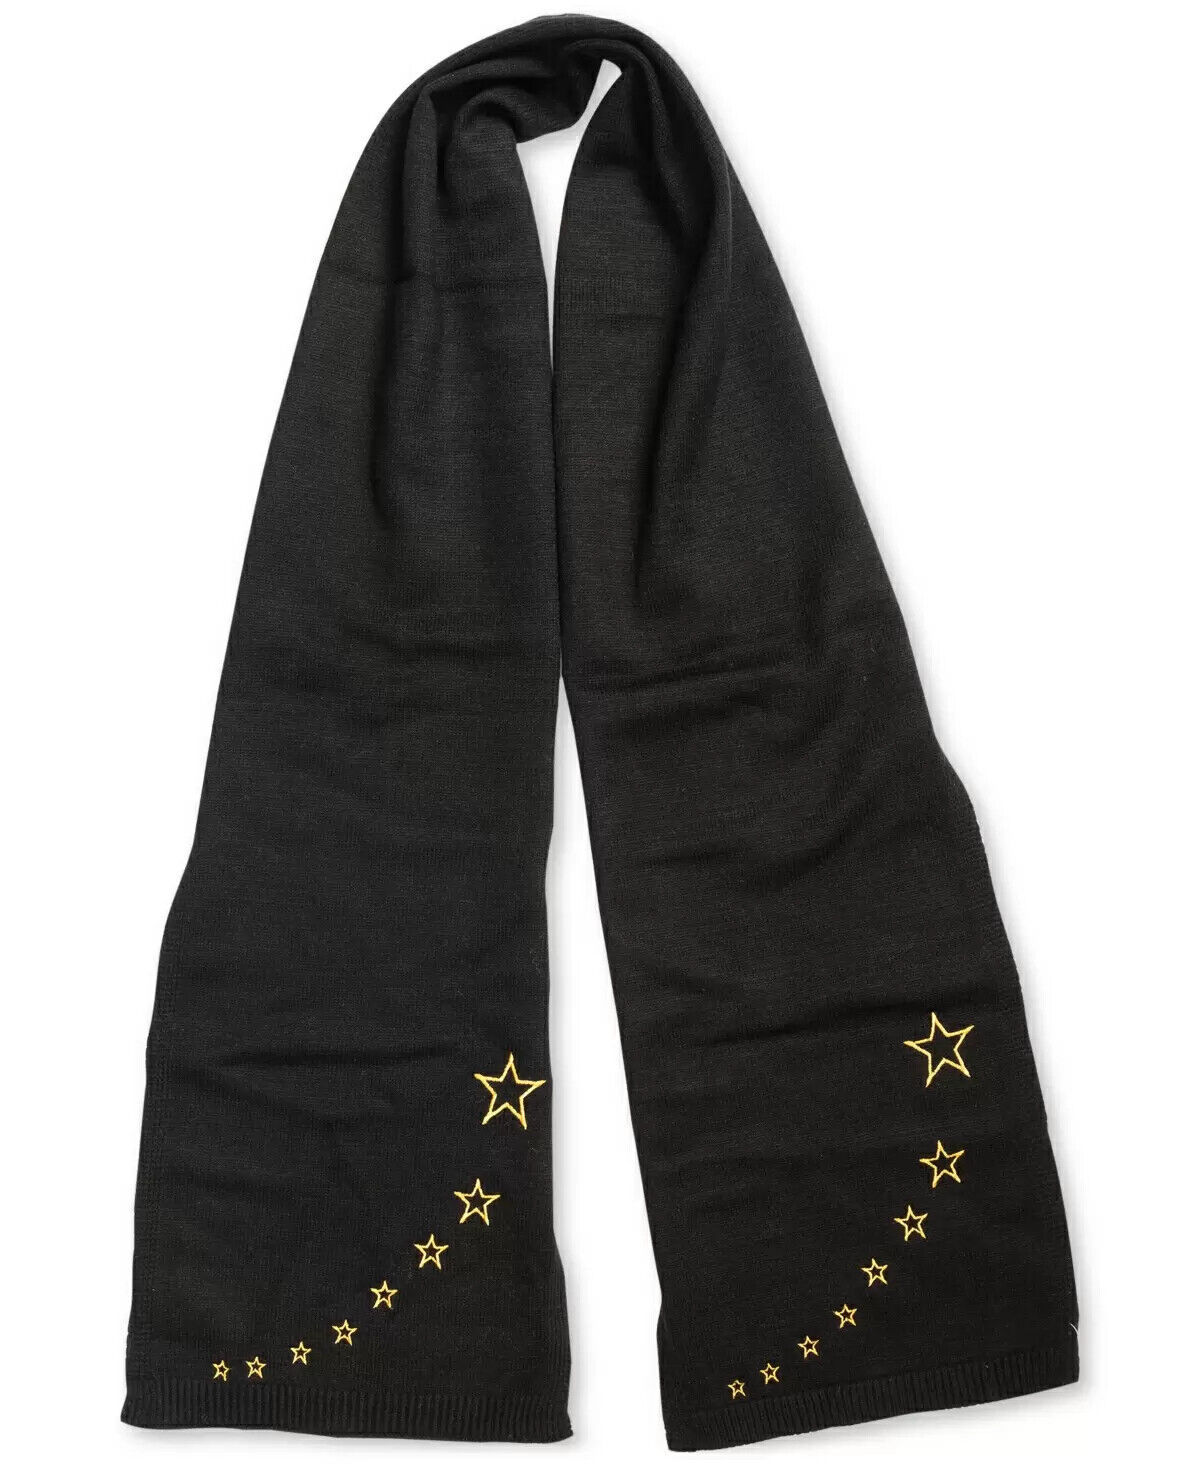 Womens Scarf Embroidered Black with Gold and similar items